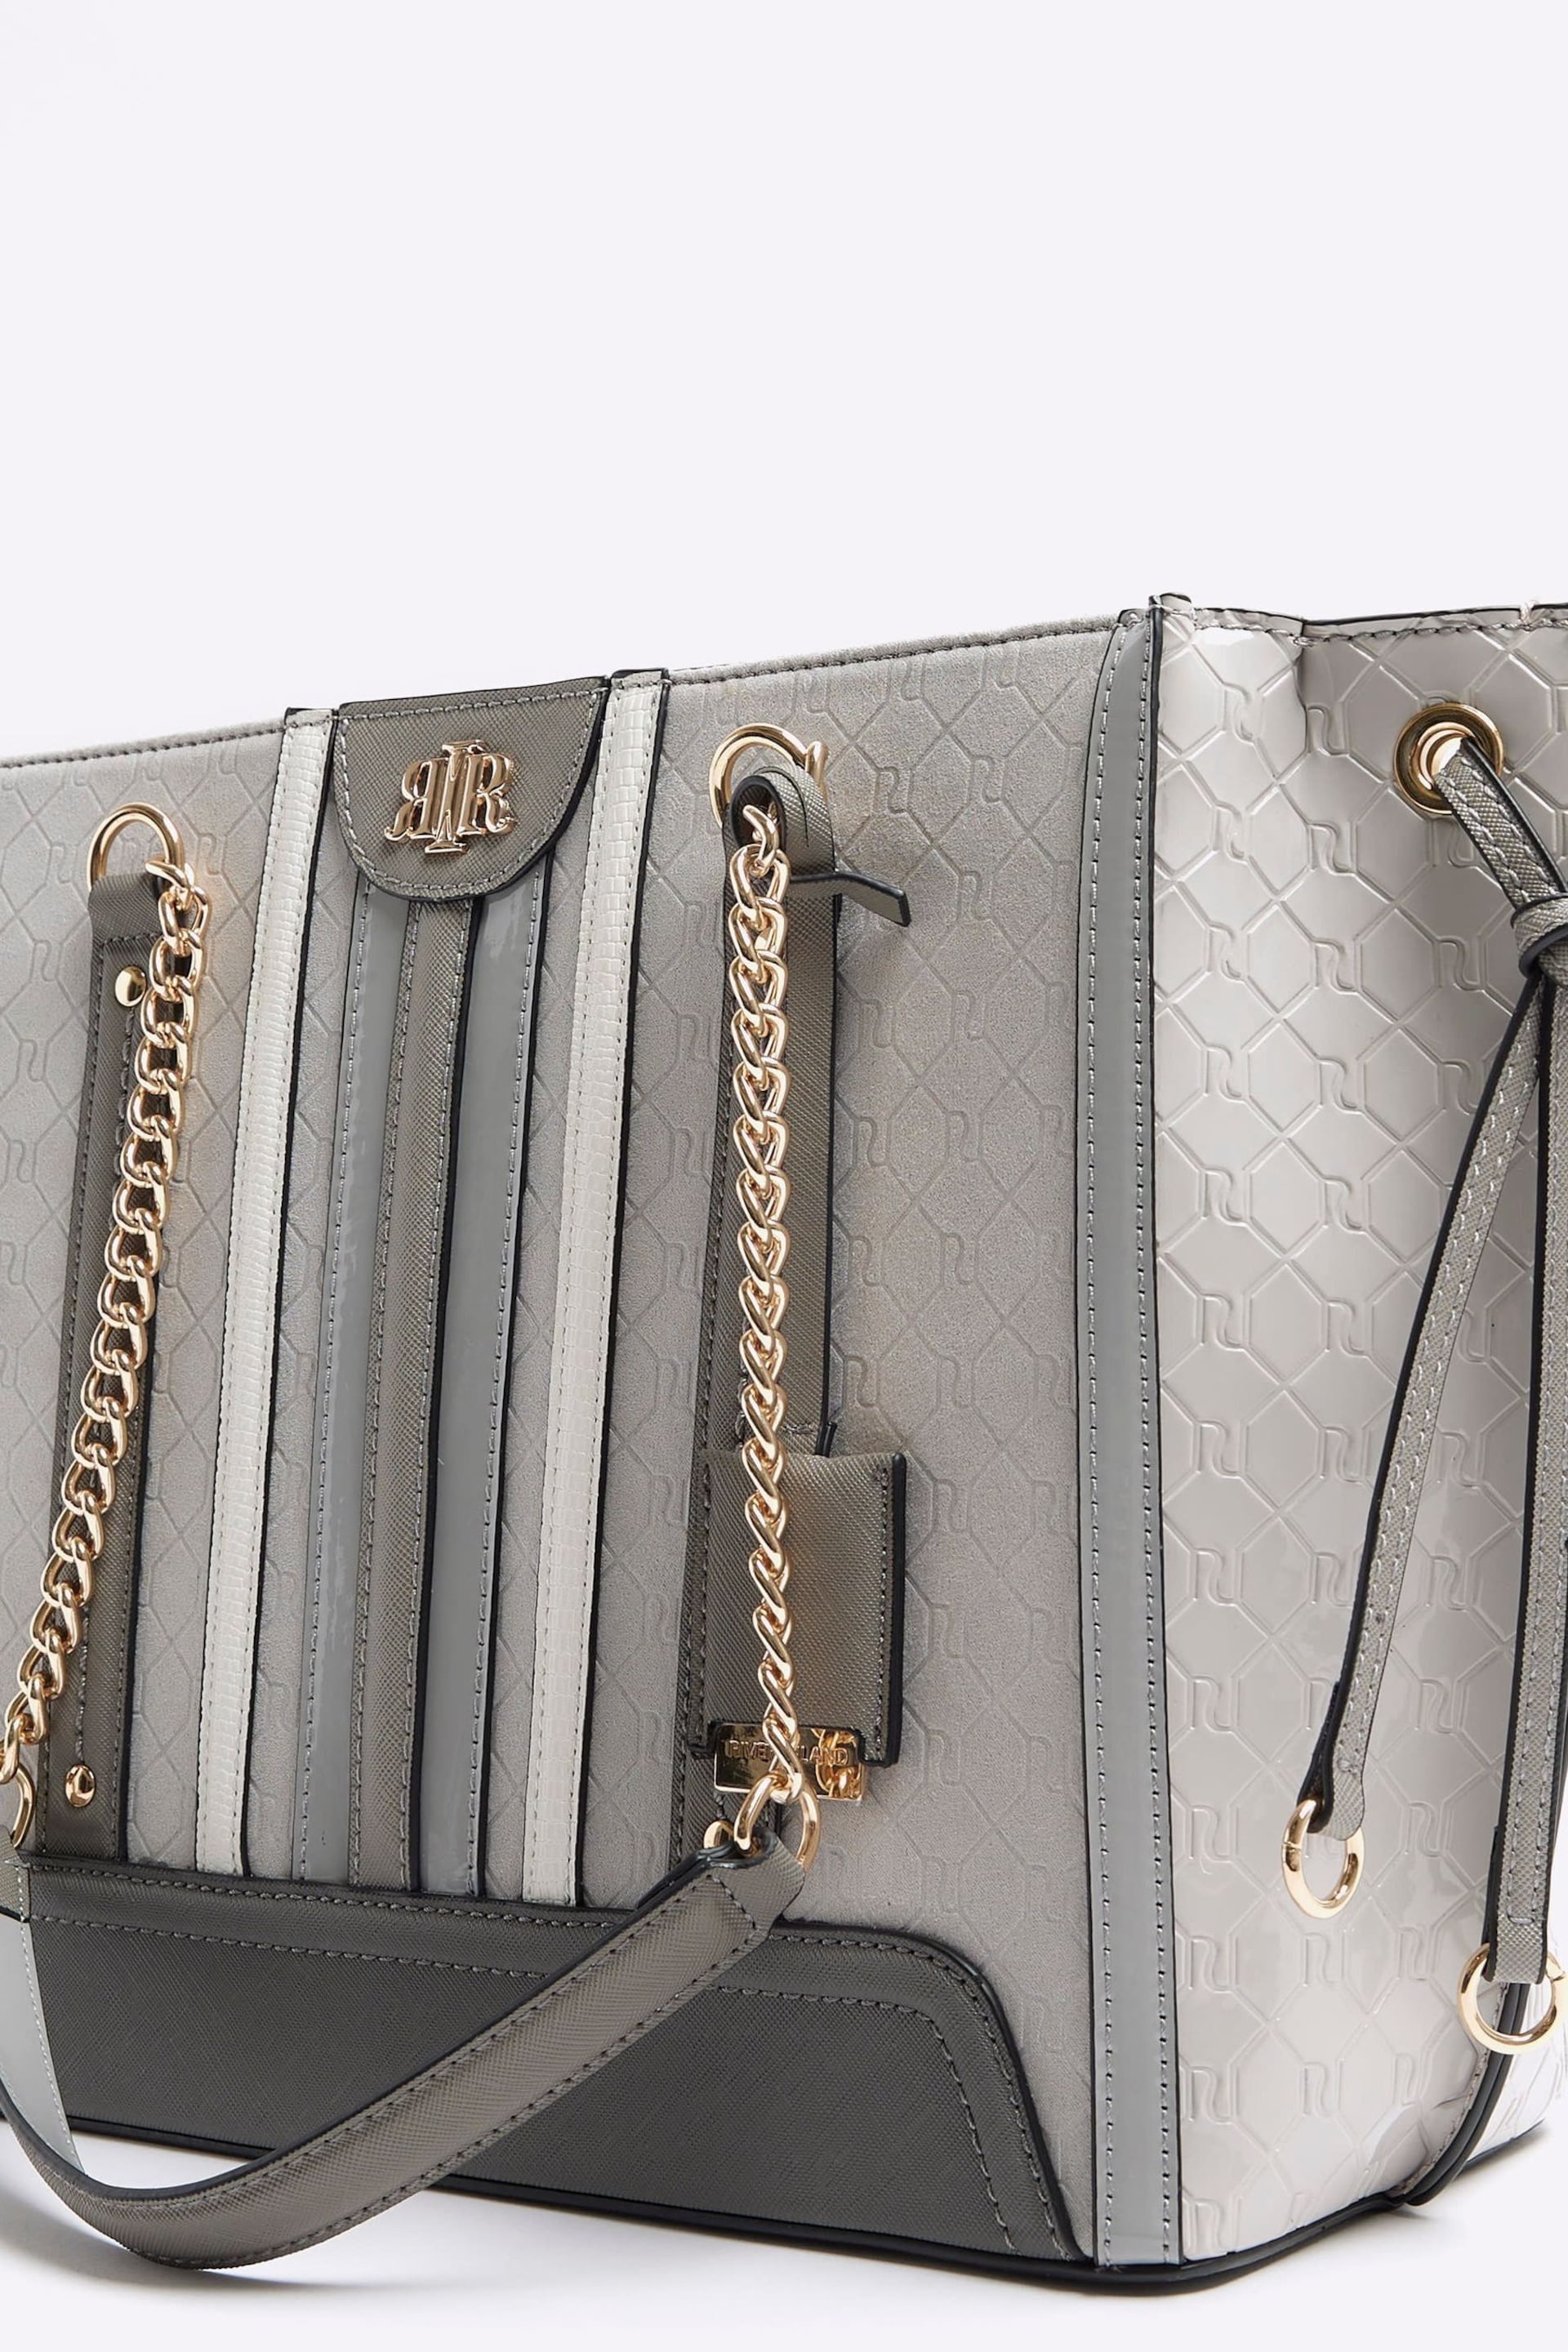 River Island Grey Panelled Wing Tote Bag - Image 4 of 4